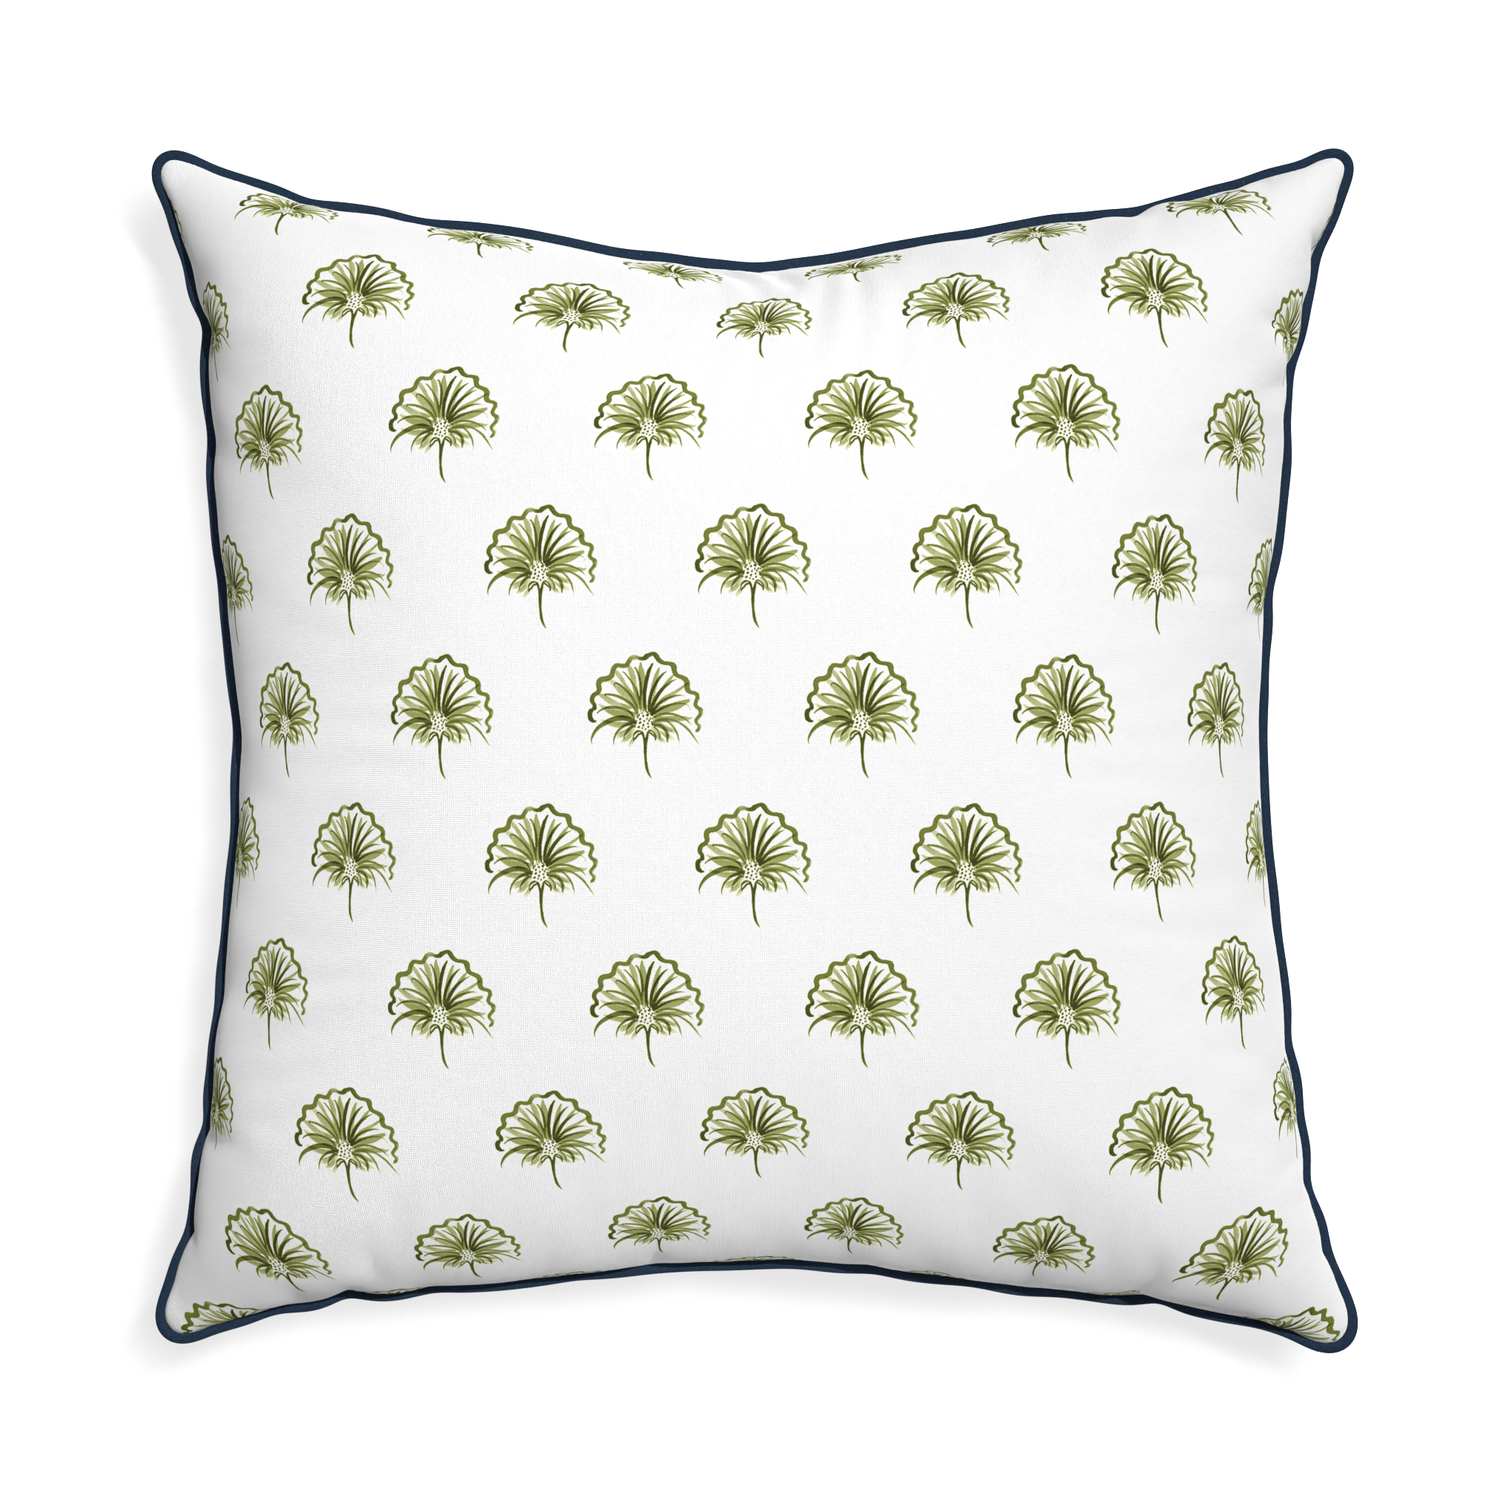 Euro-sham penelope moss custom green floralpillow with c piping on white background